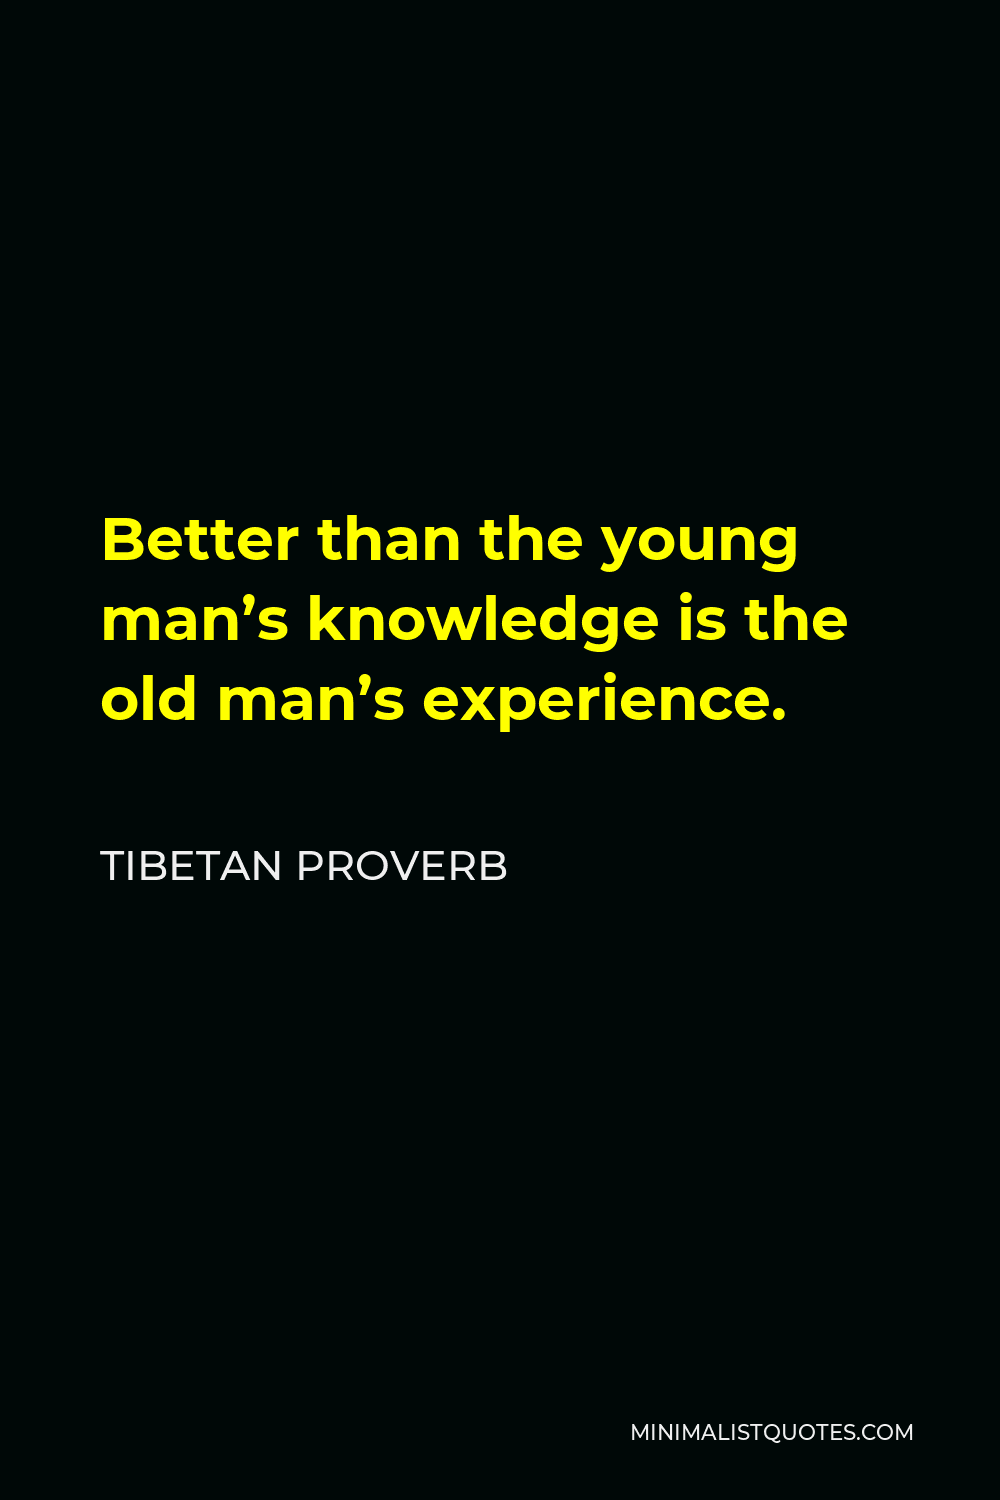 Tibetan Proverb Quote - Better than the young man’s knowledge is the old man’s experience.